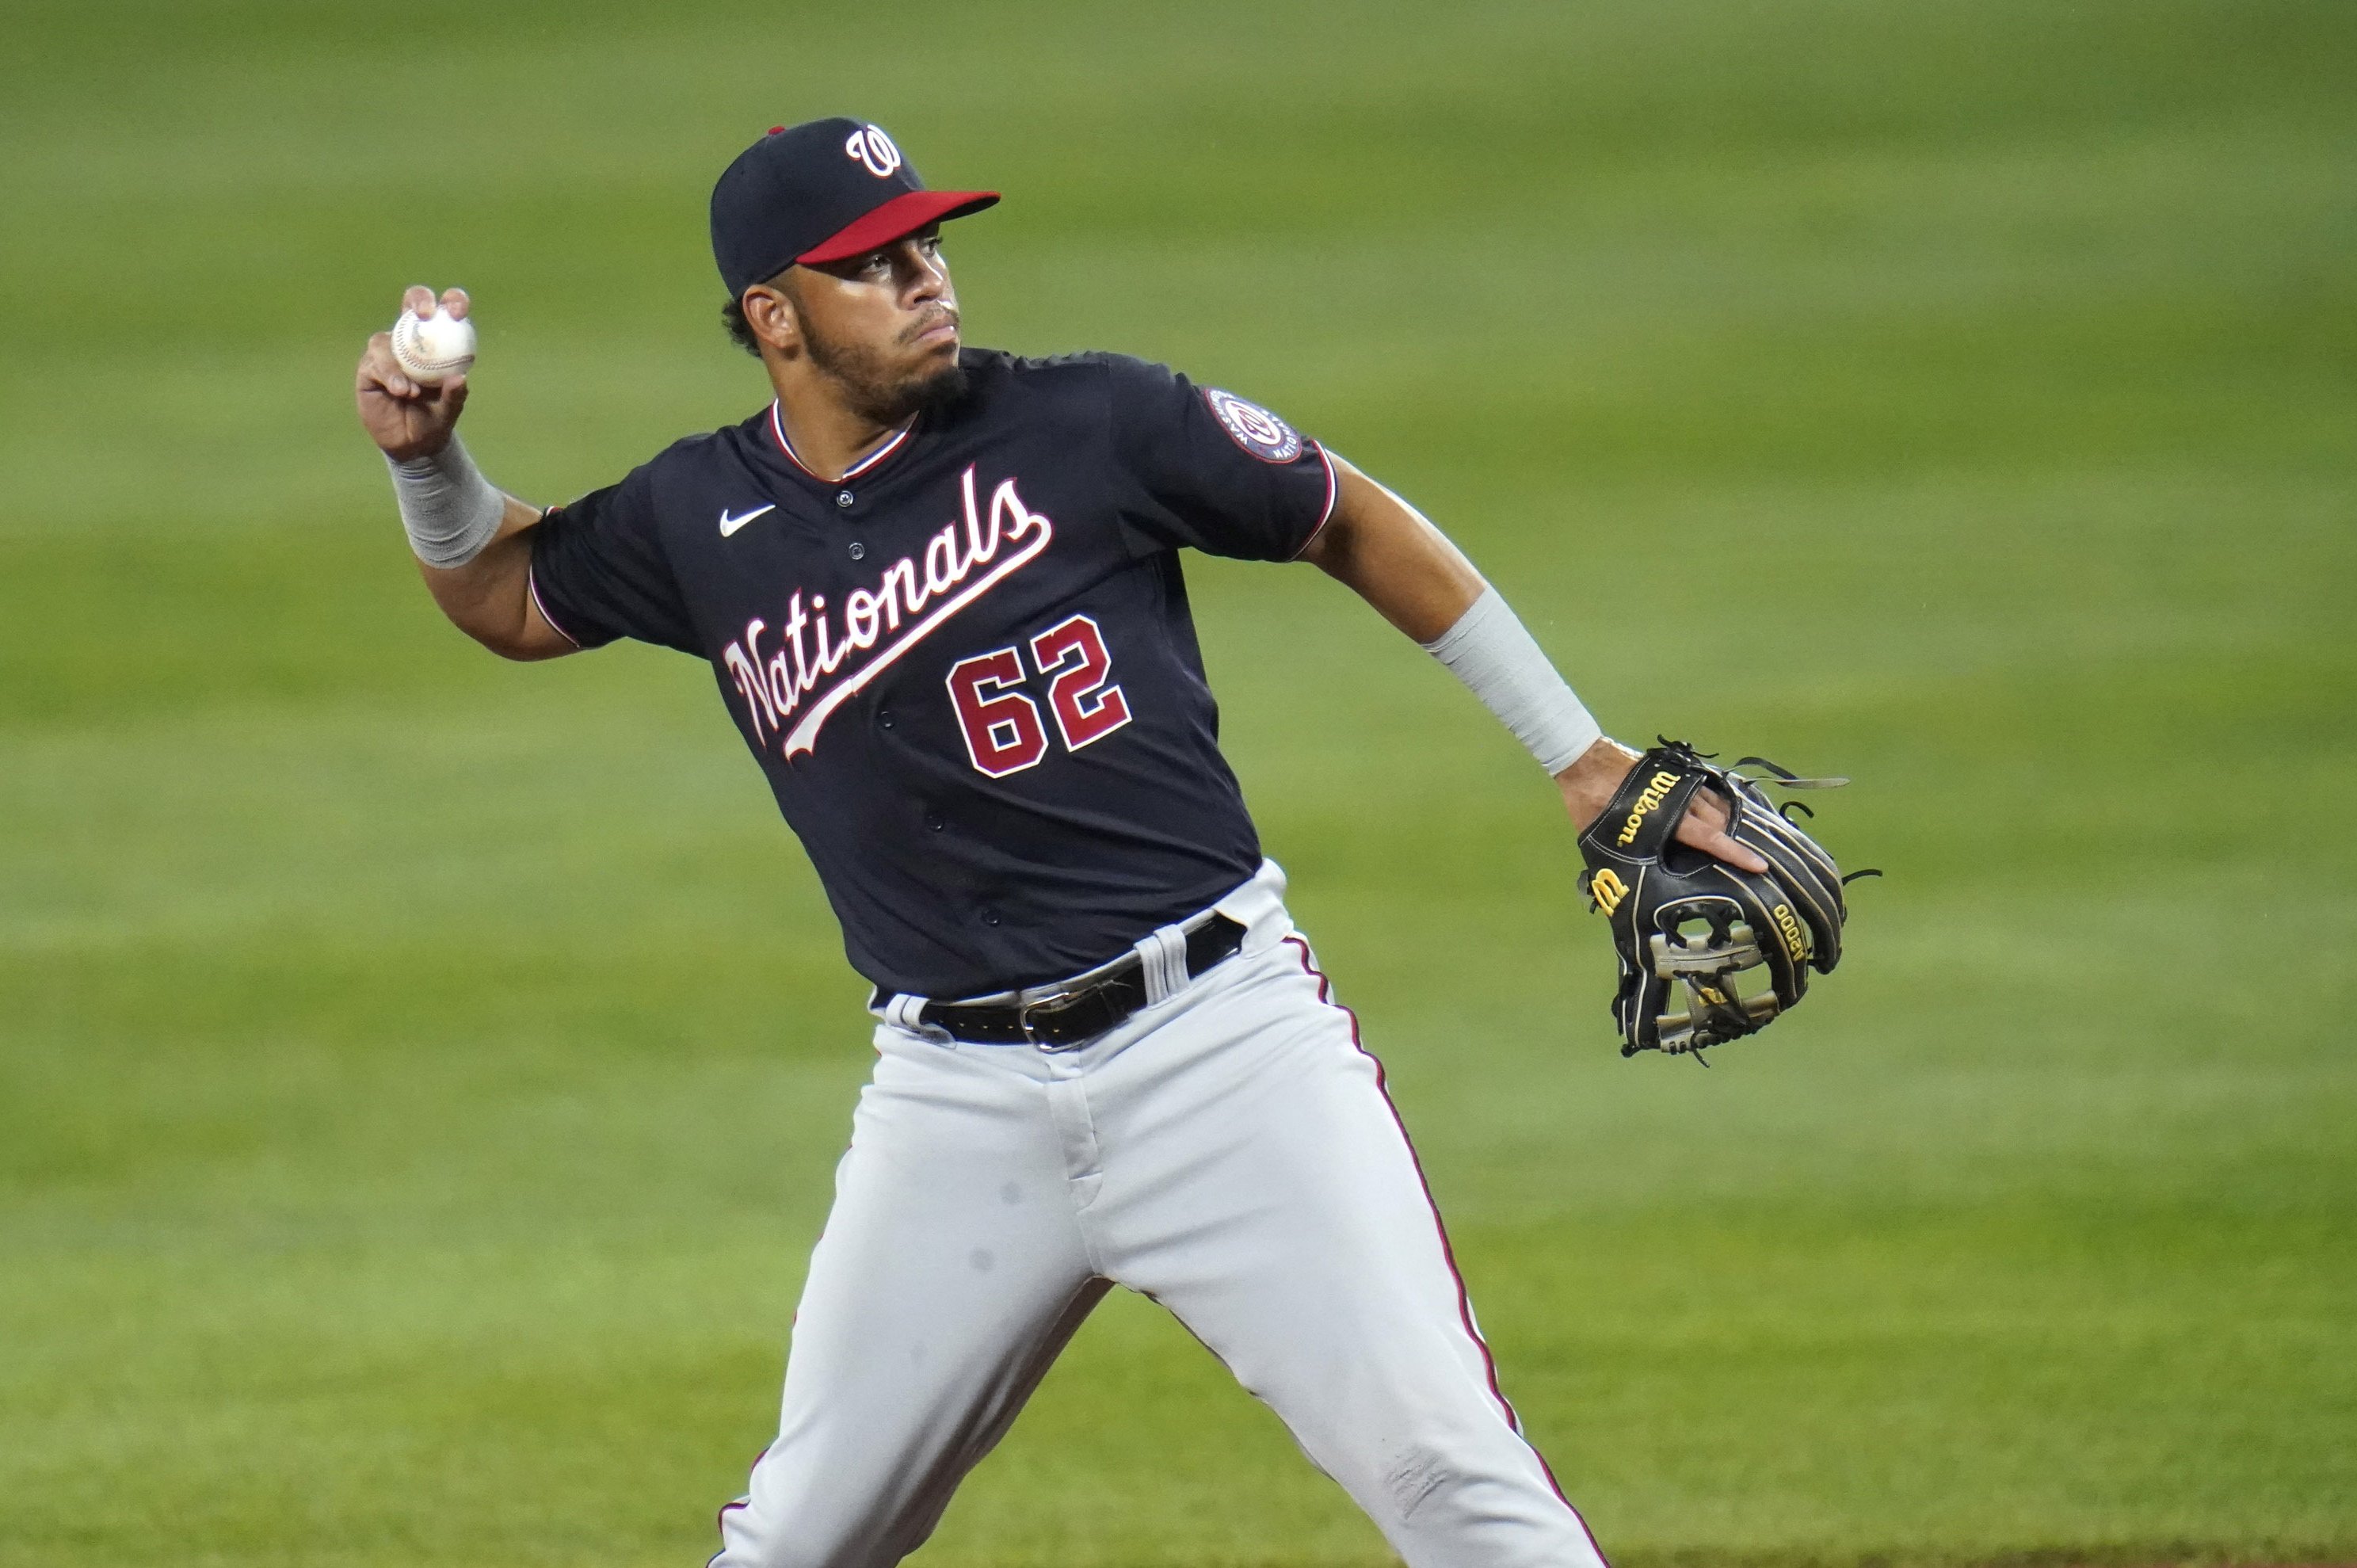 Ray Torres' odd path from high school to Washington Nationals